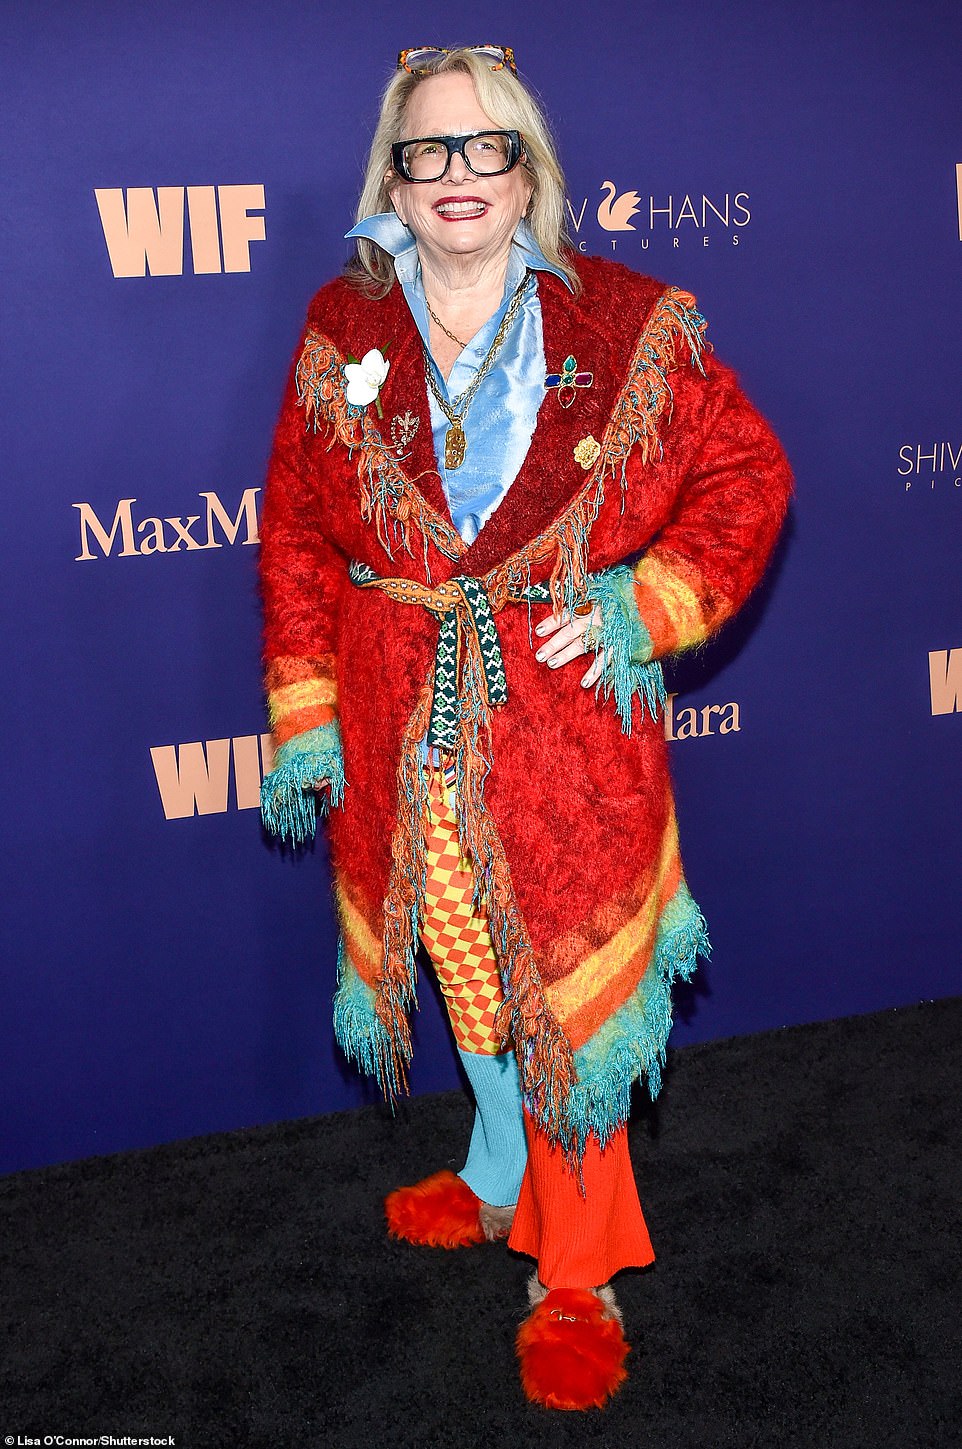 Laura Karpman put on a bold display in bright colors and mixed patterns as the Oscar-nominated composer turned up in the most eccentric outfit of the night. She wore a colorful cozy cardigan with a tie around the waist layered over patterned bellbottom pants and a sky blue polo top